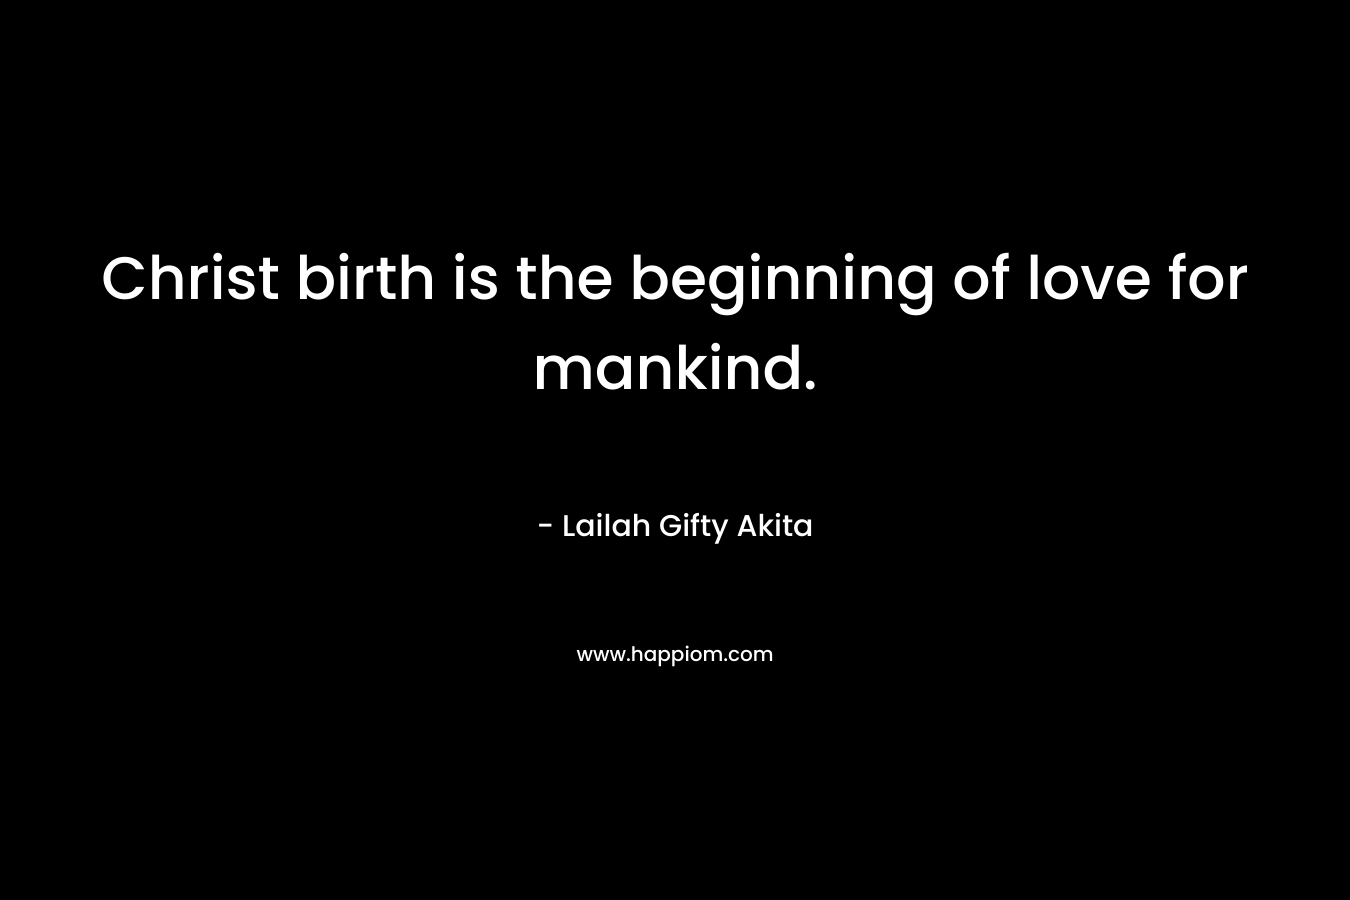 Christ birth is the beginning of love for mankind.